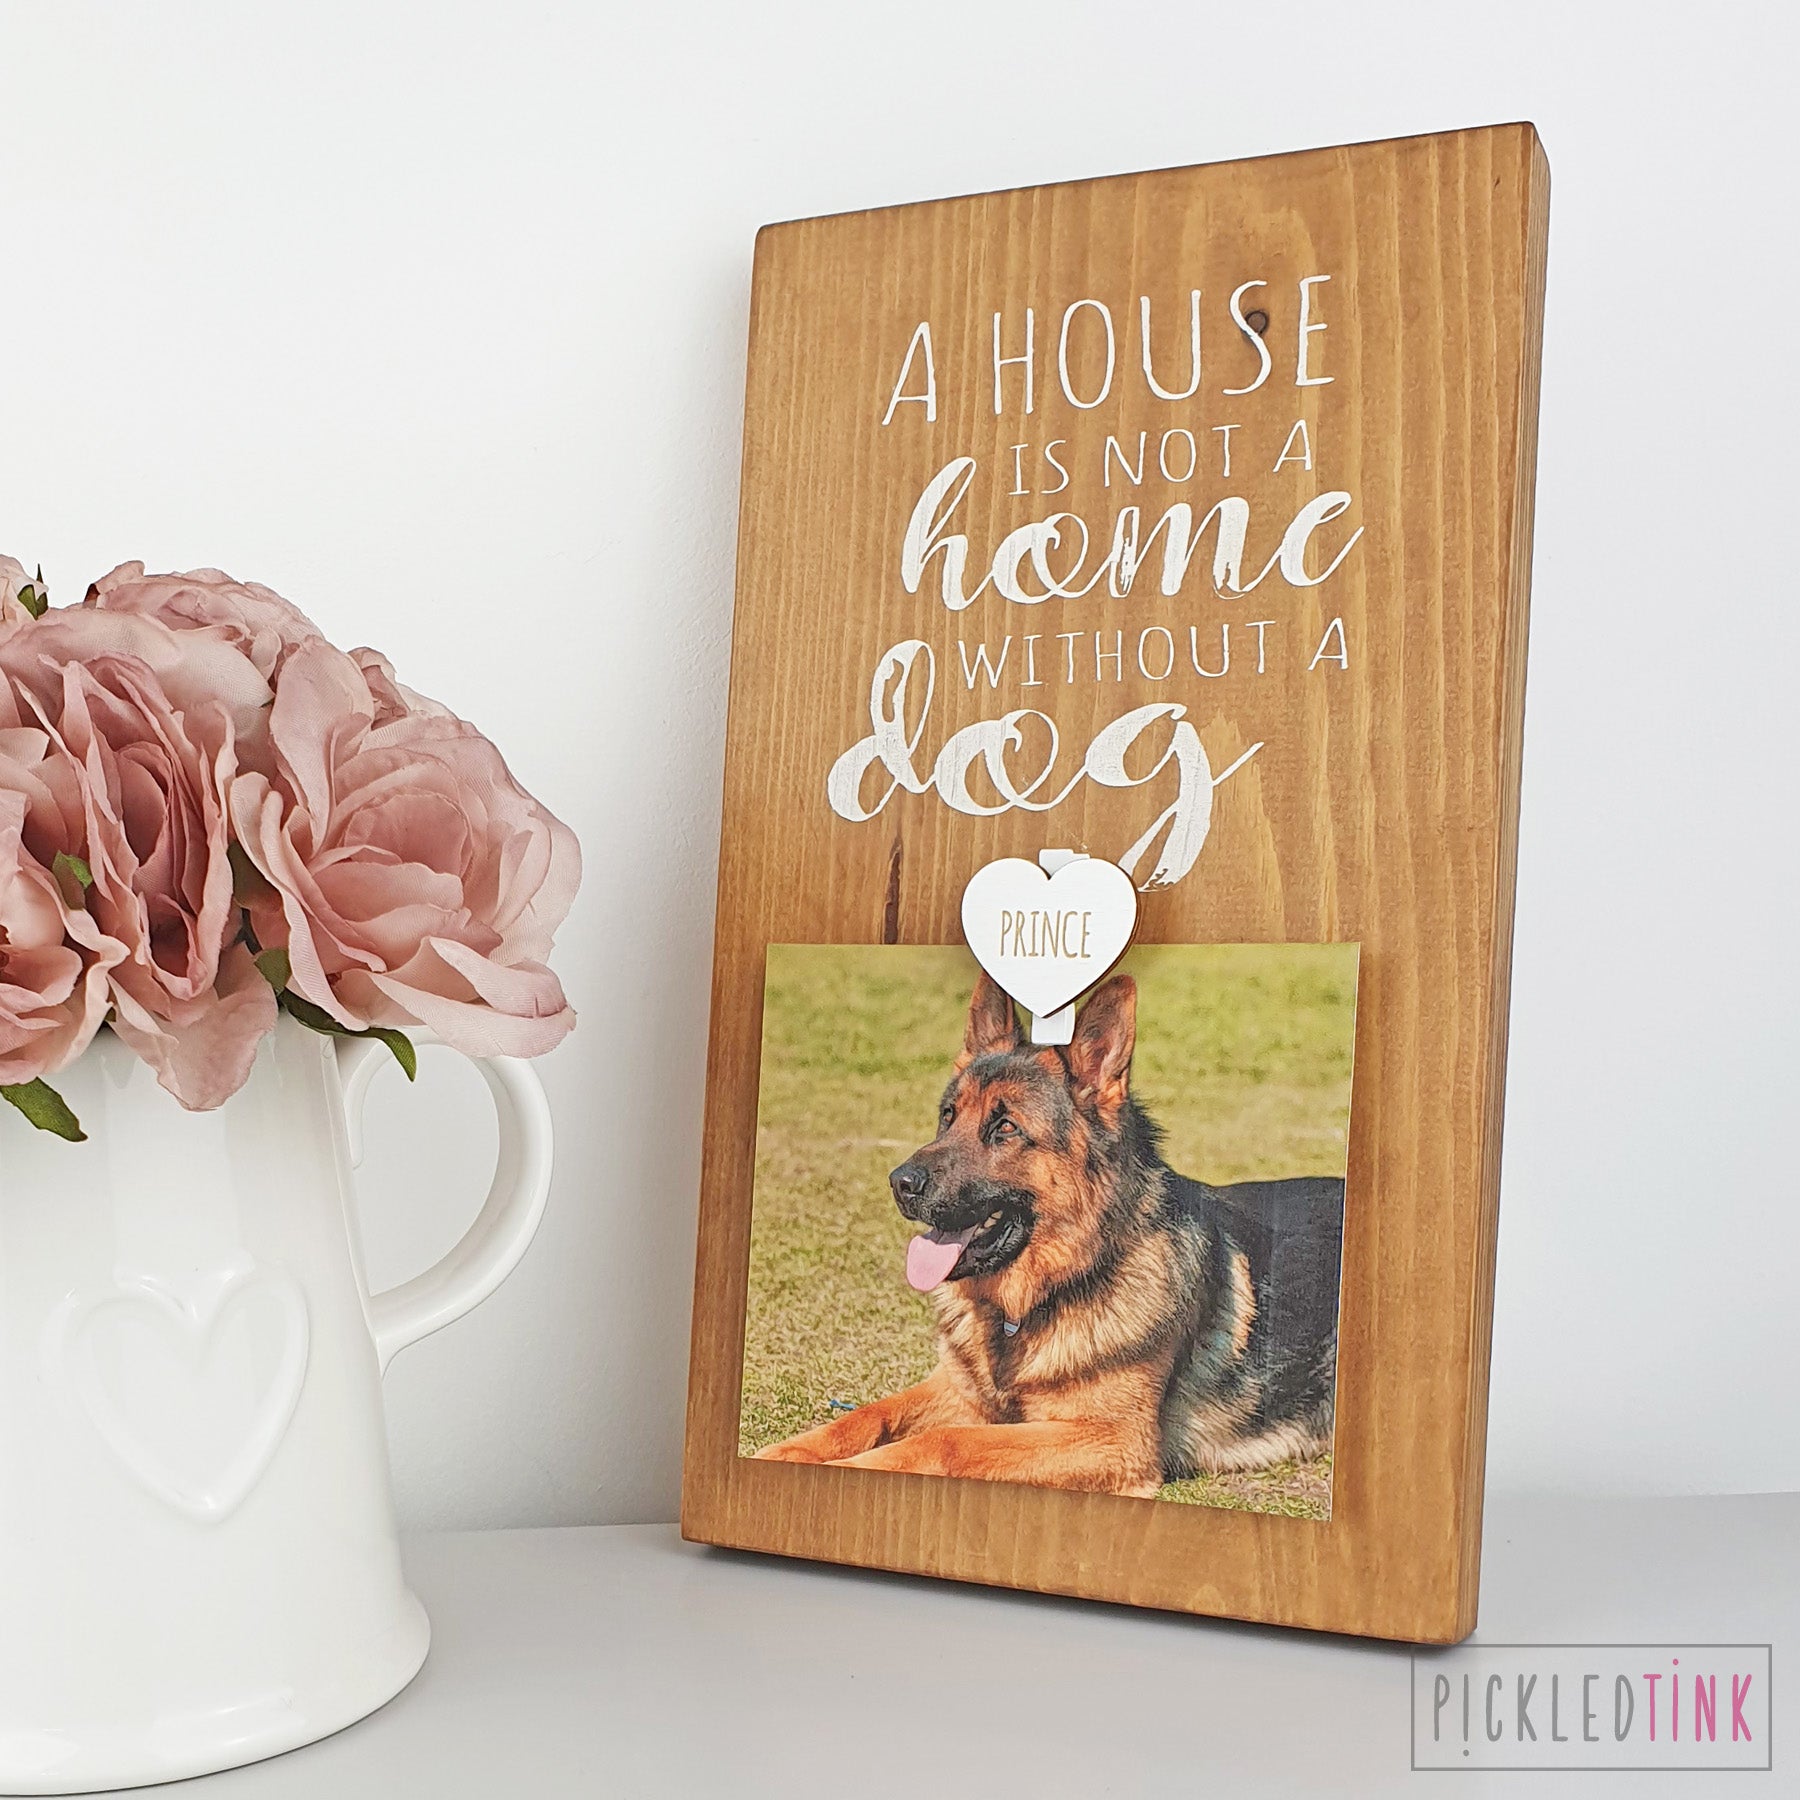 A house is not a home without a dog - Peg Photo Frame